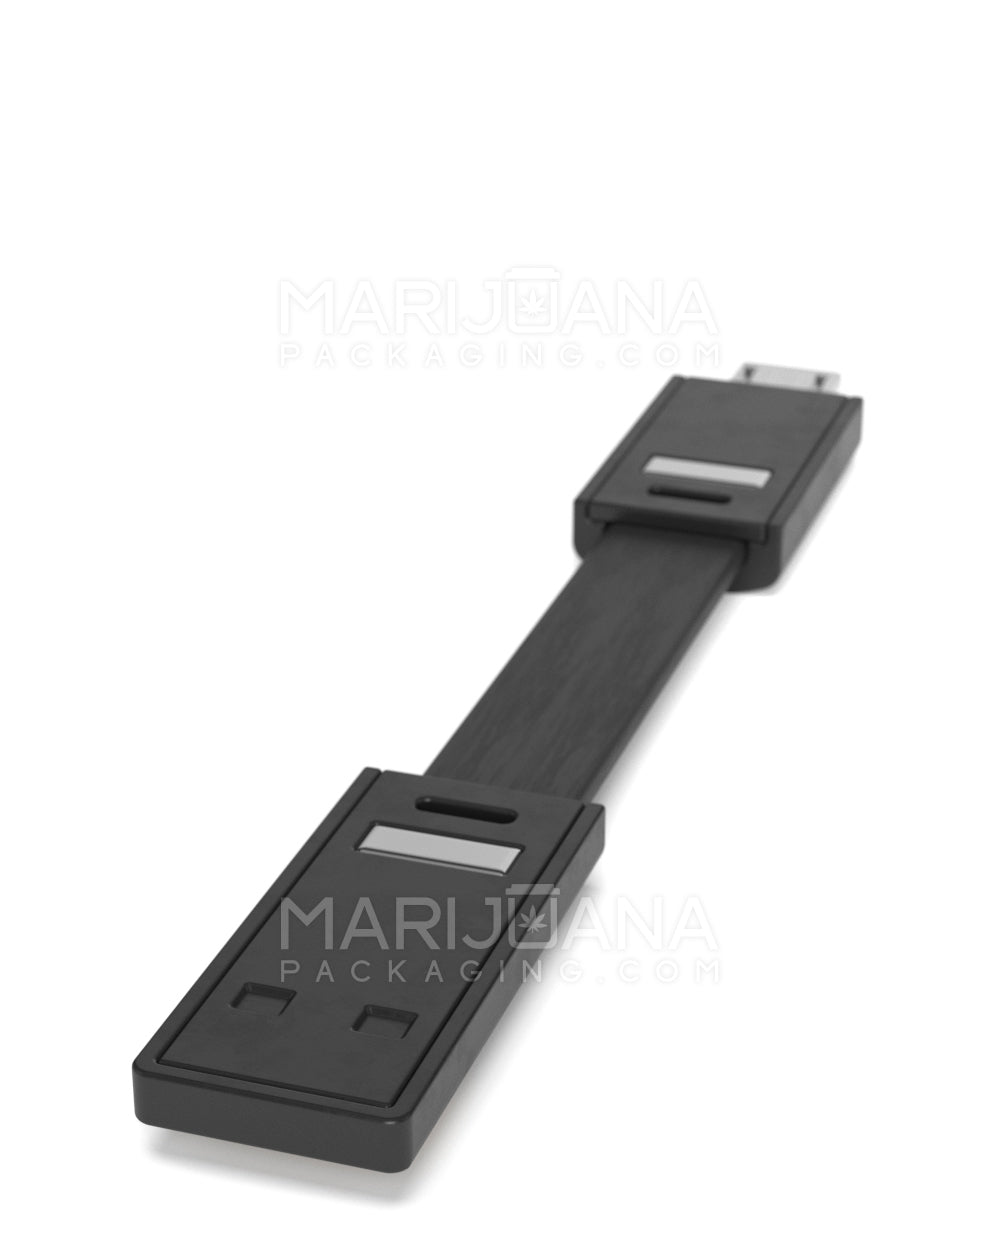 Vaporizer 3.5" USB to Micro USB Connection Cable | Black - 100 Count - 6